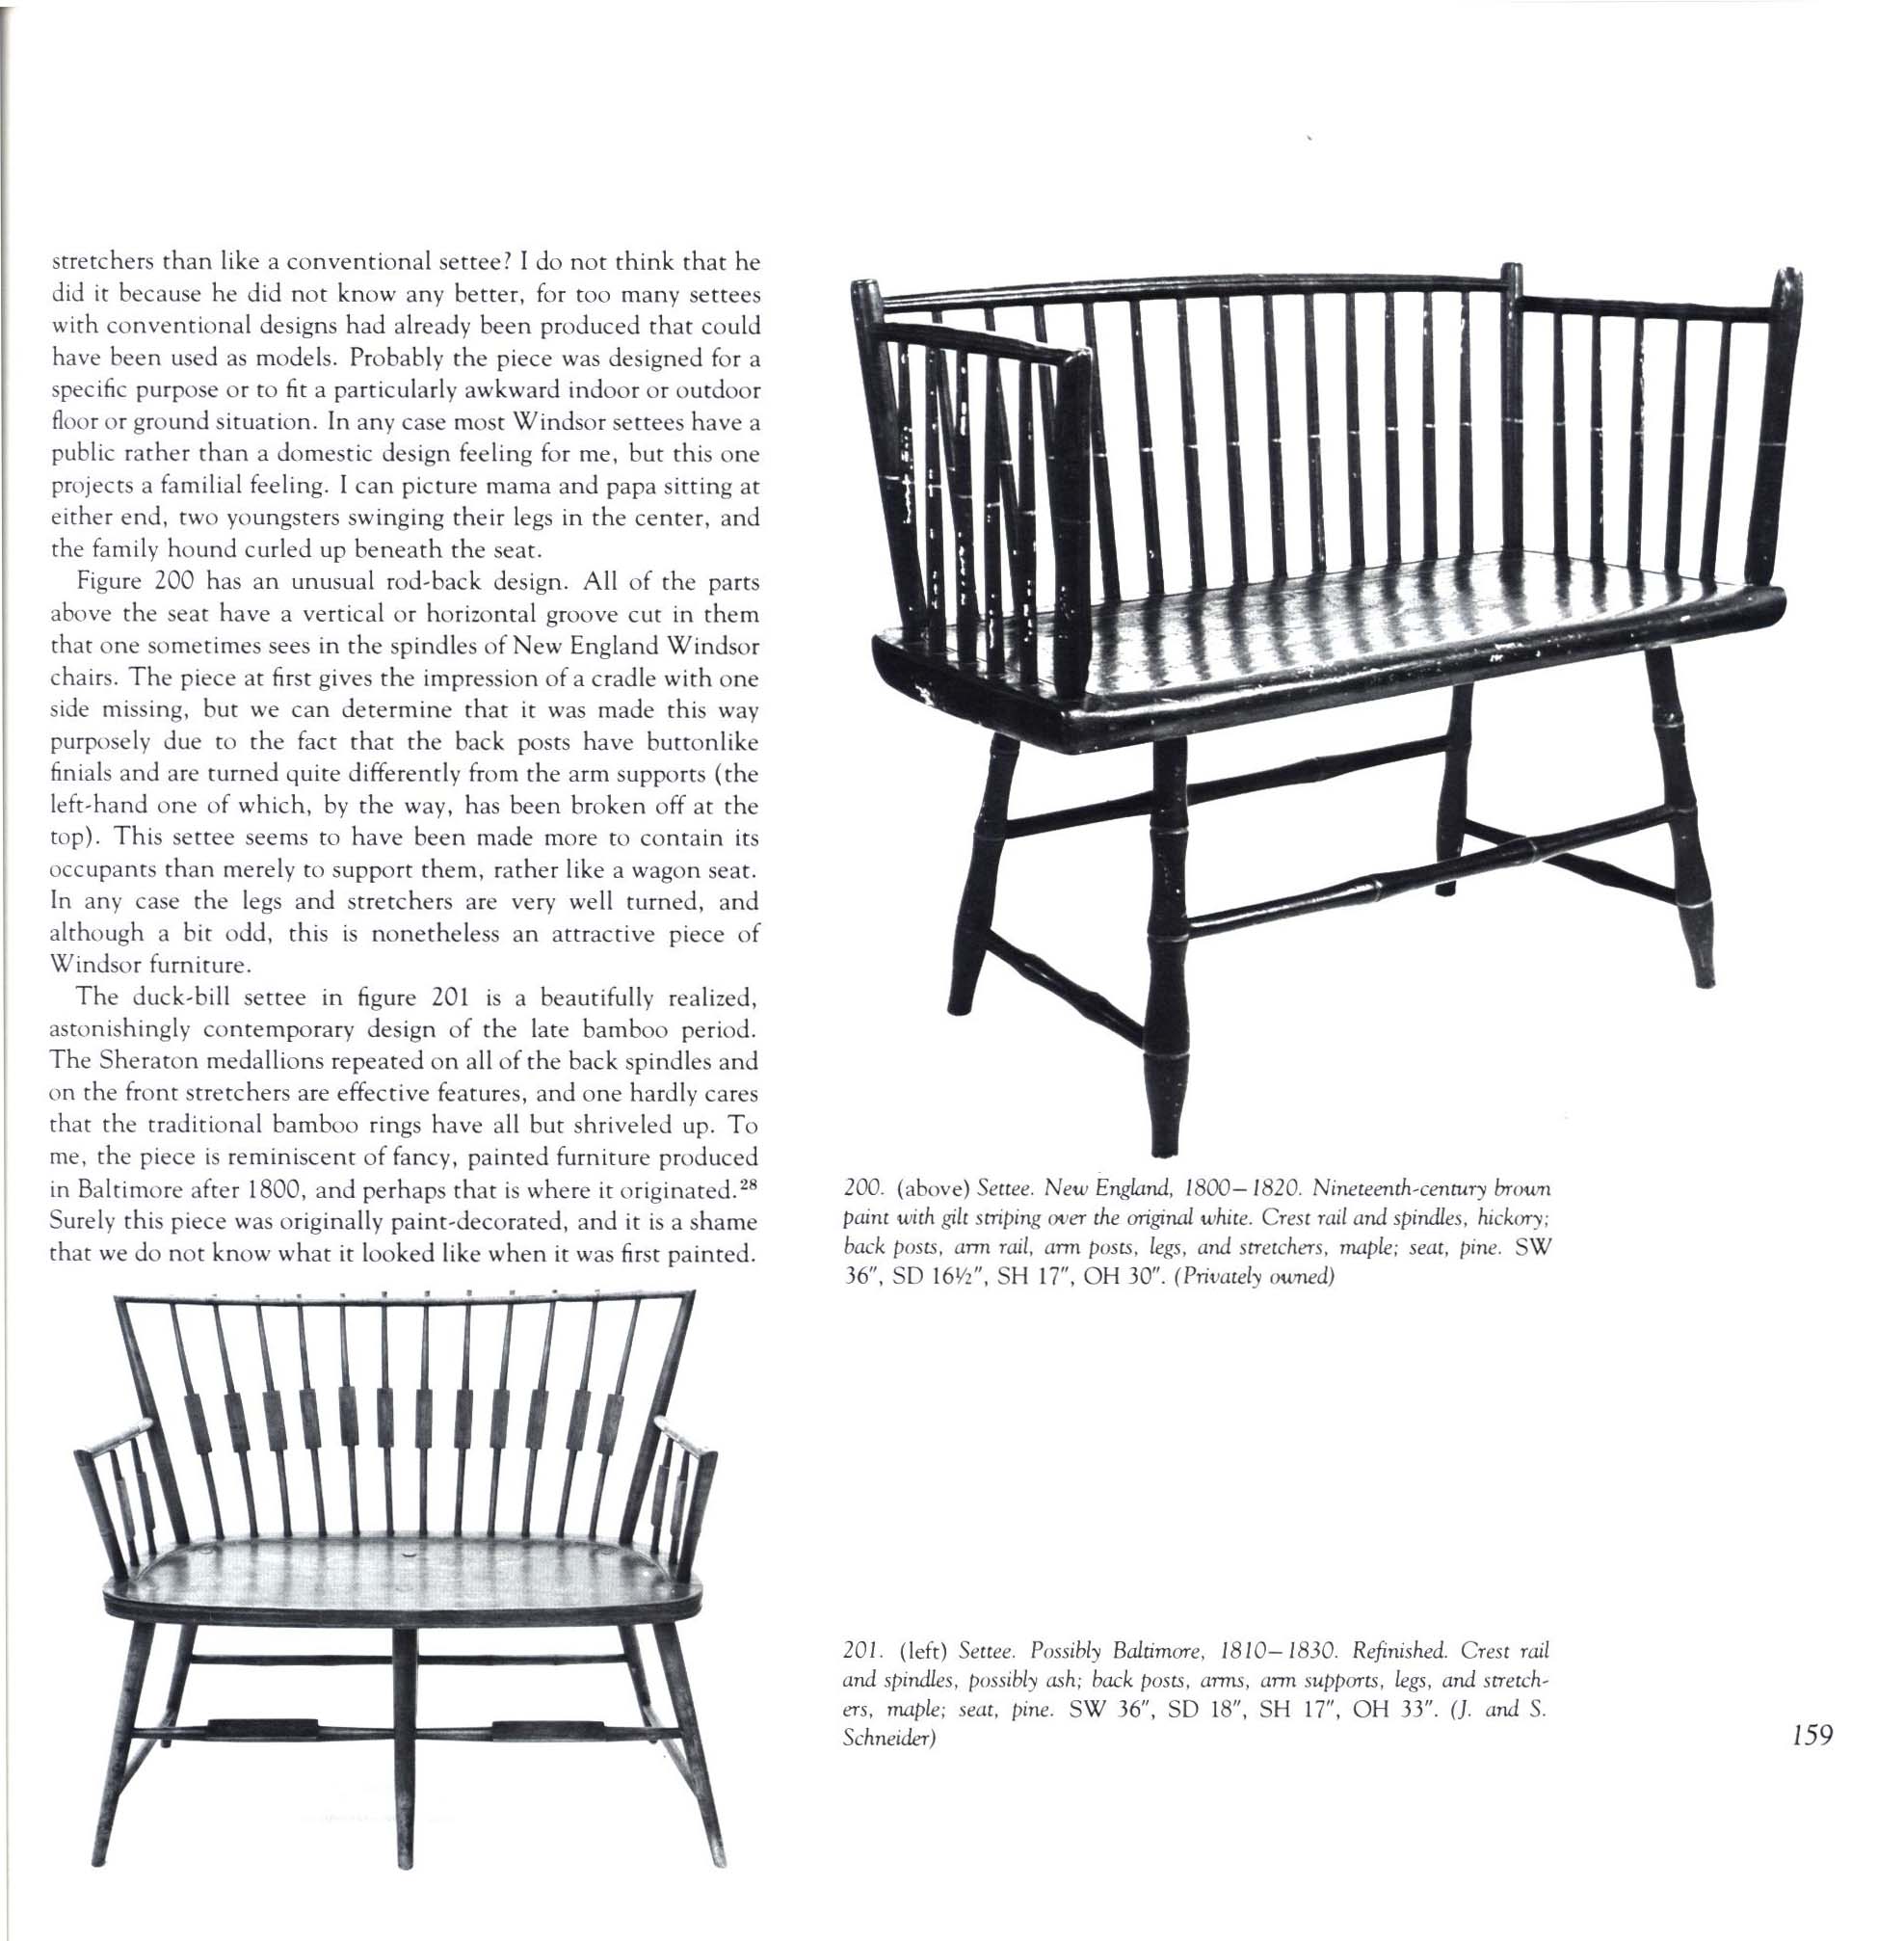 THE WINDSOR STYLE IN AMERICA: a pictorial study of the history and regional characteristics of the most popular furniture form of eighteenth-century America, 1730-1830. runn3241j